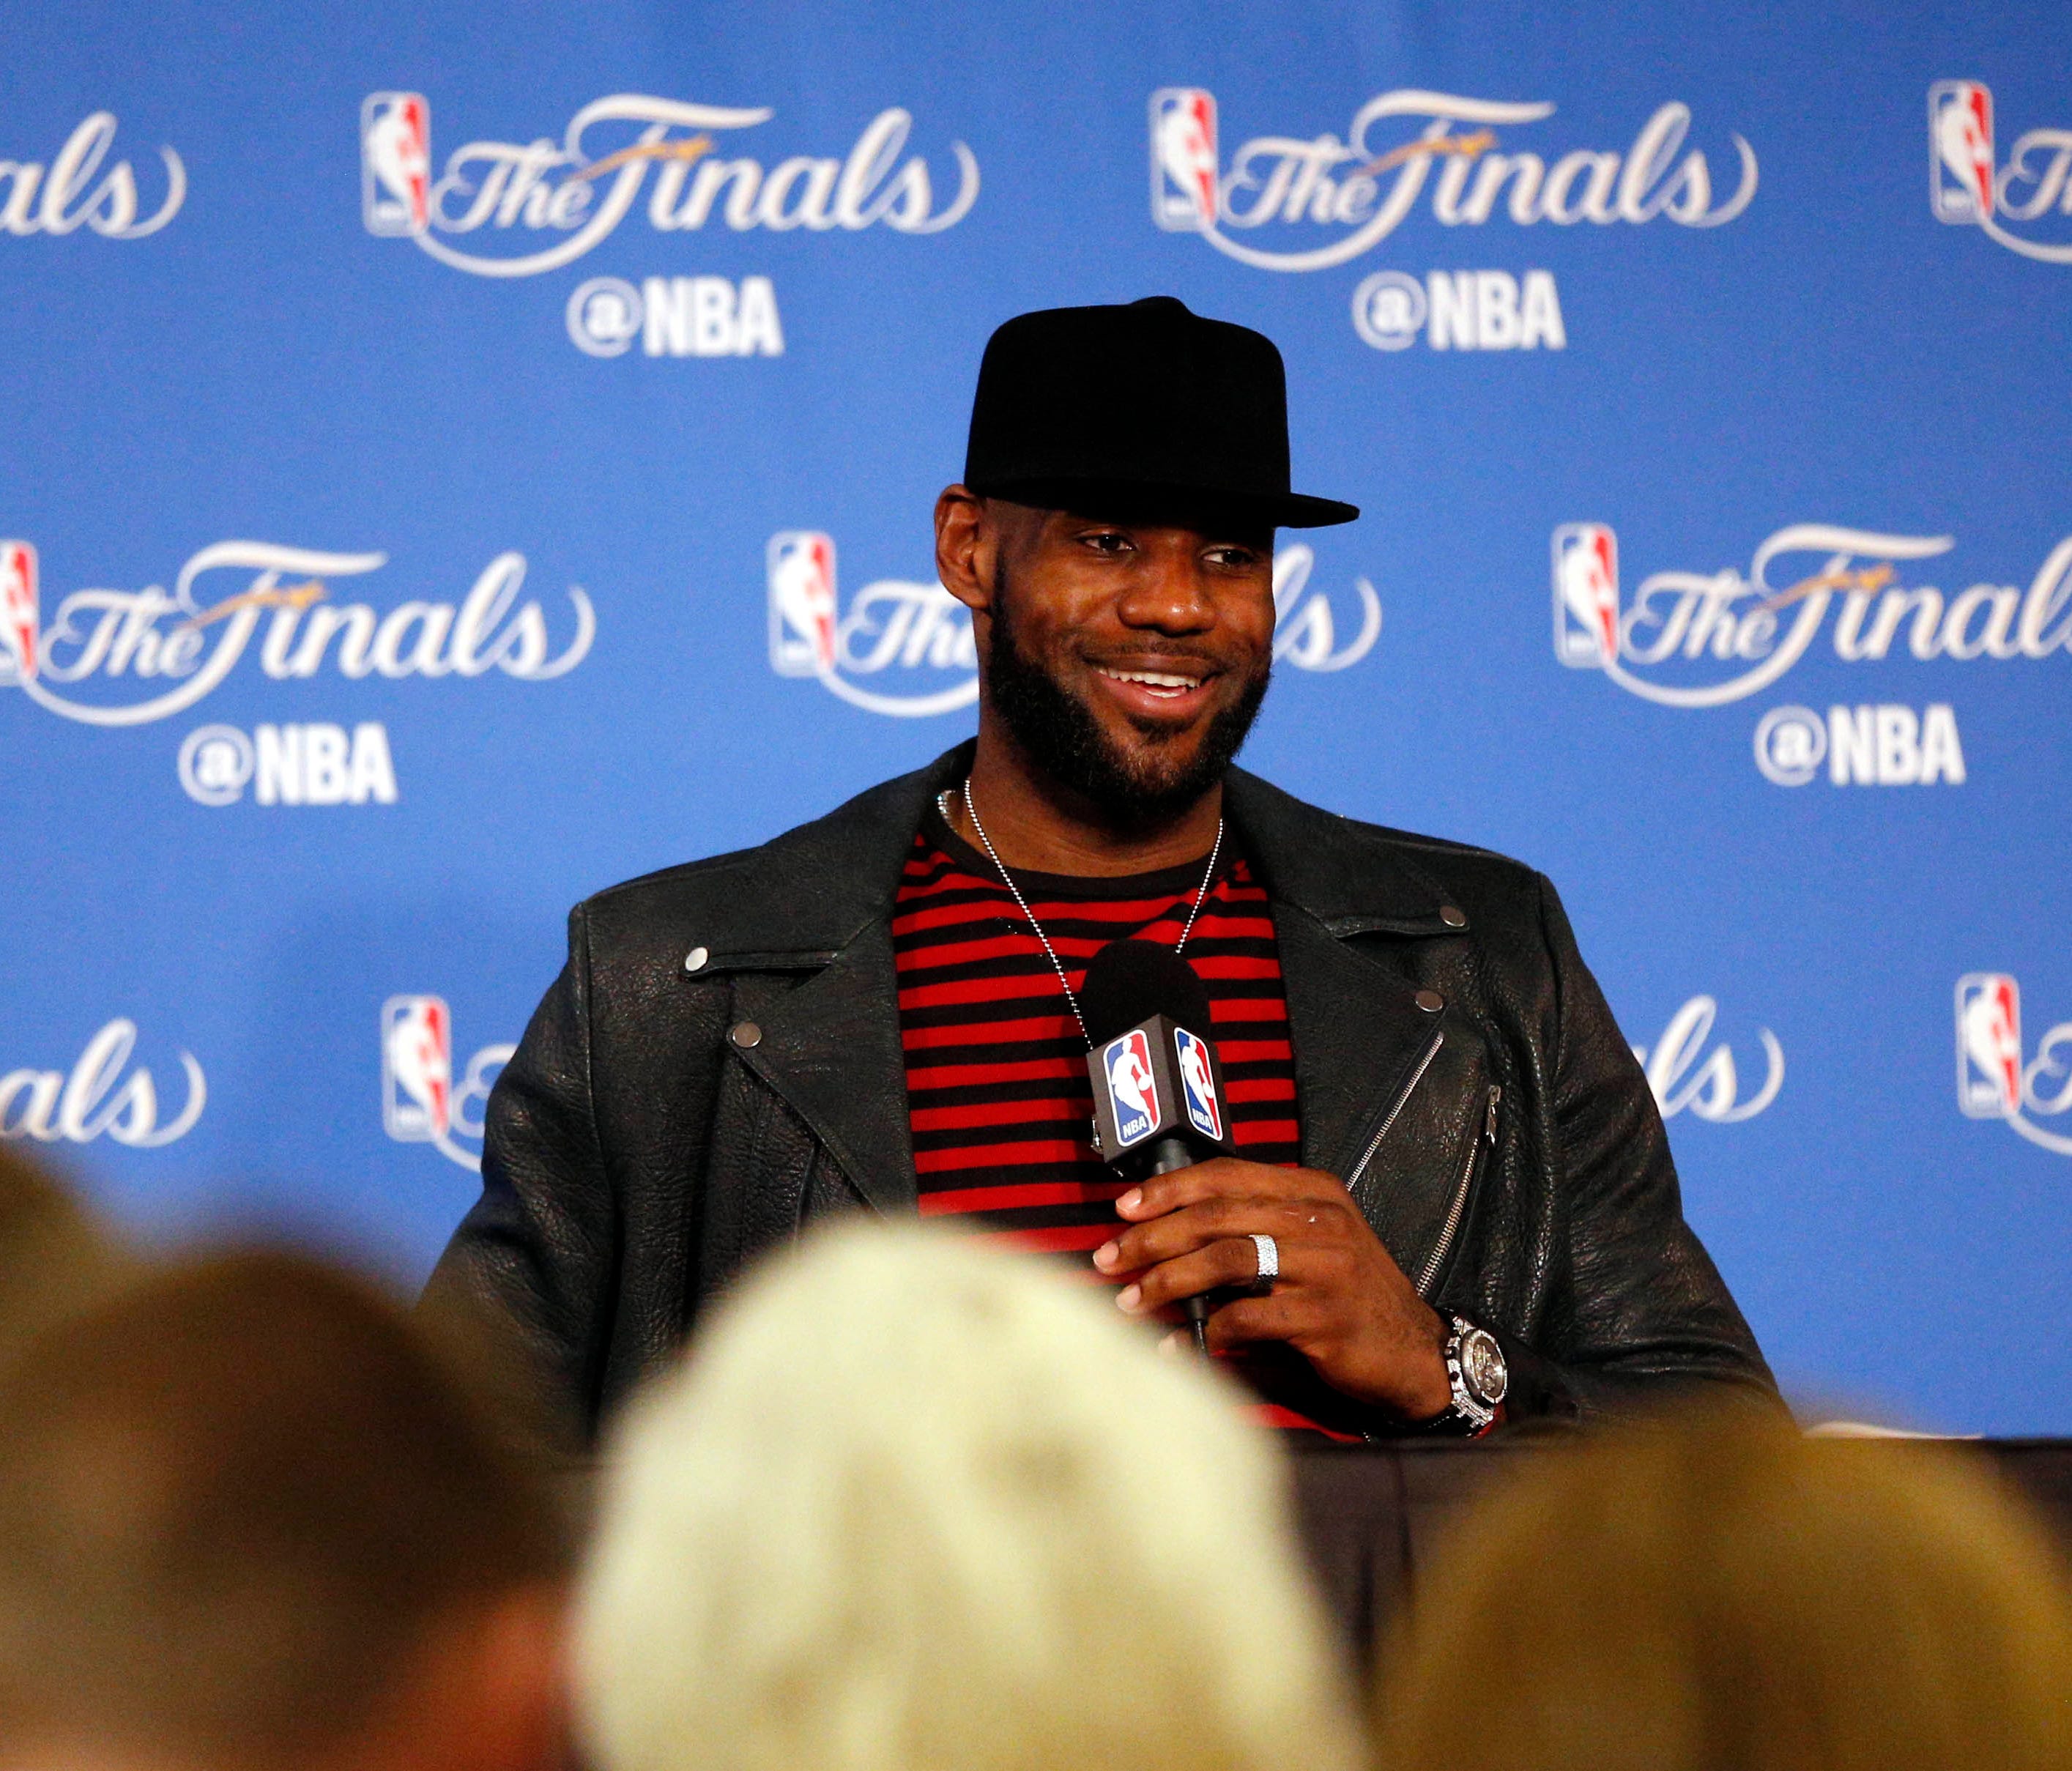 LeBron James at a press conference after Game 5 of the 2017 NBA Finals against the Golden State Warriors at Oracle Arena.